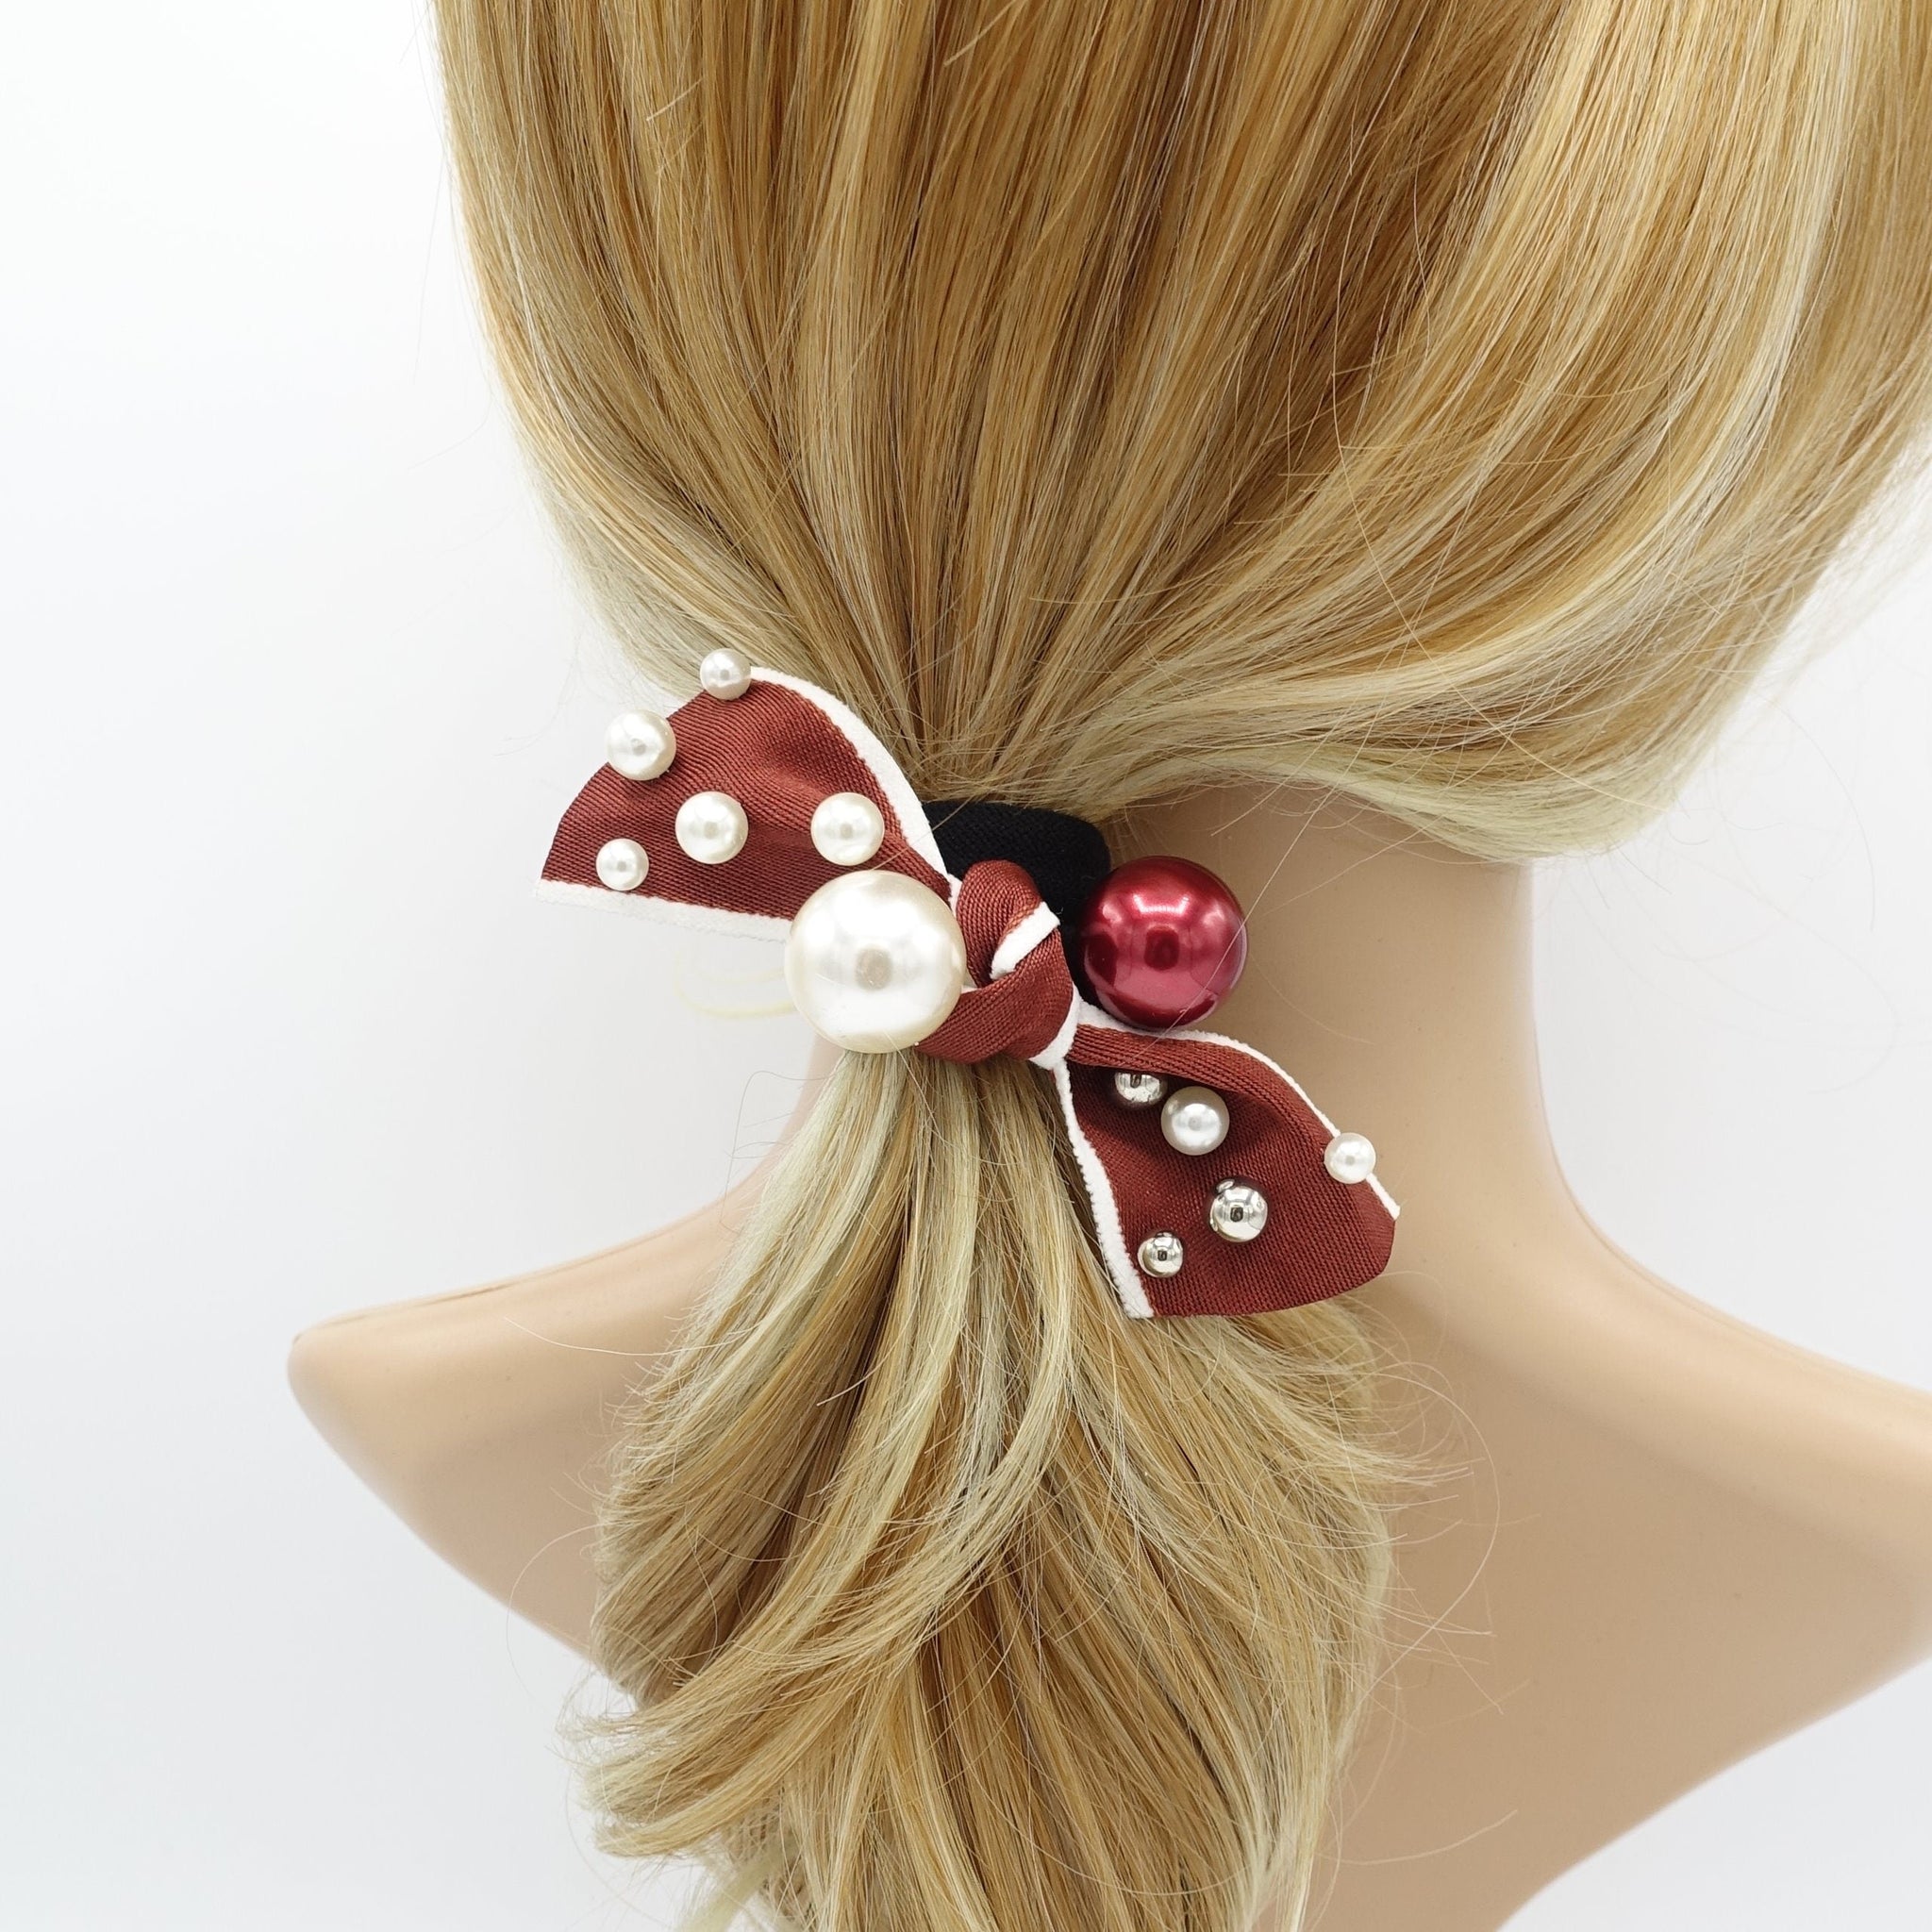 veryshine.com Ponytail holders Red wine a set of pearl decorated bow knot ponytail holders hair elastic